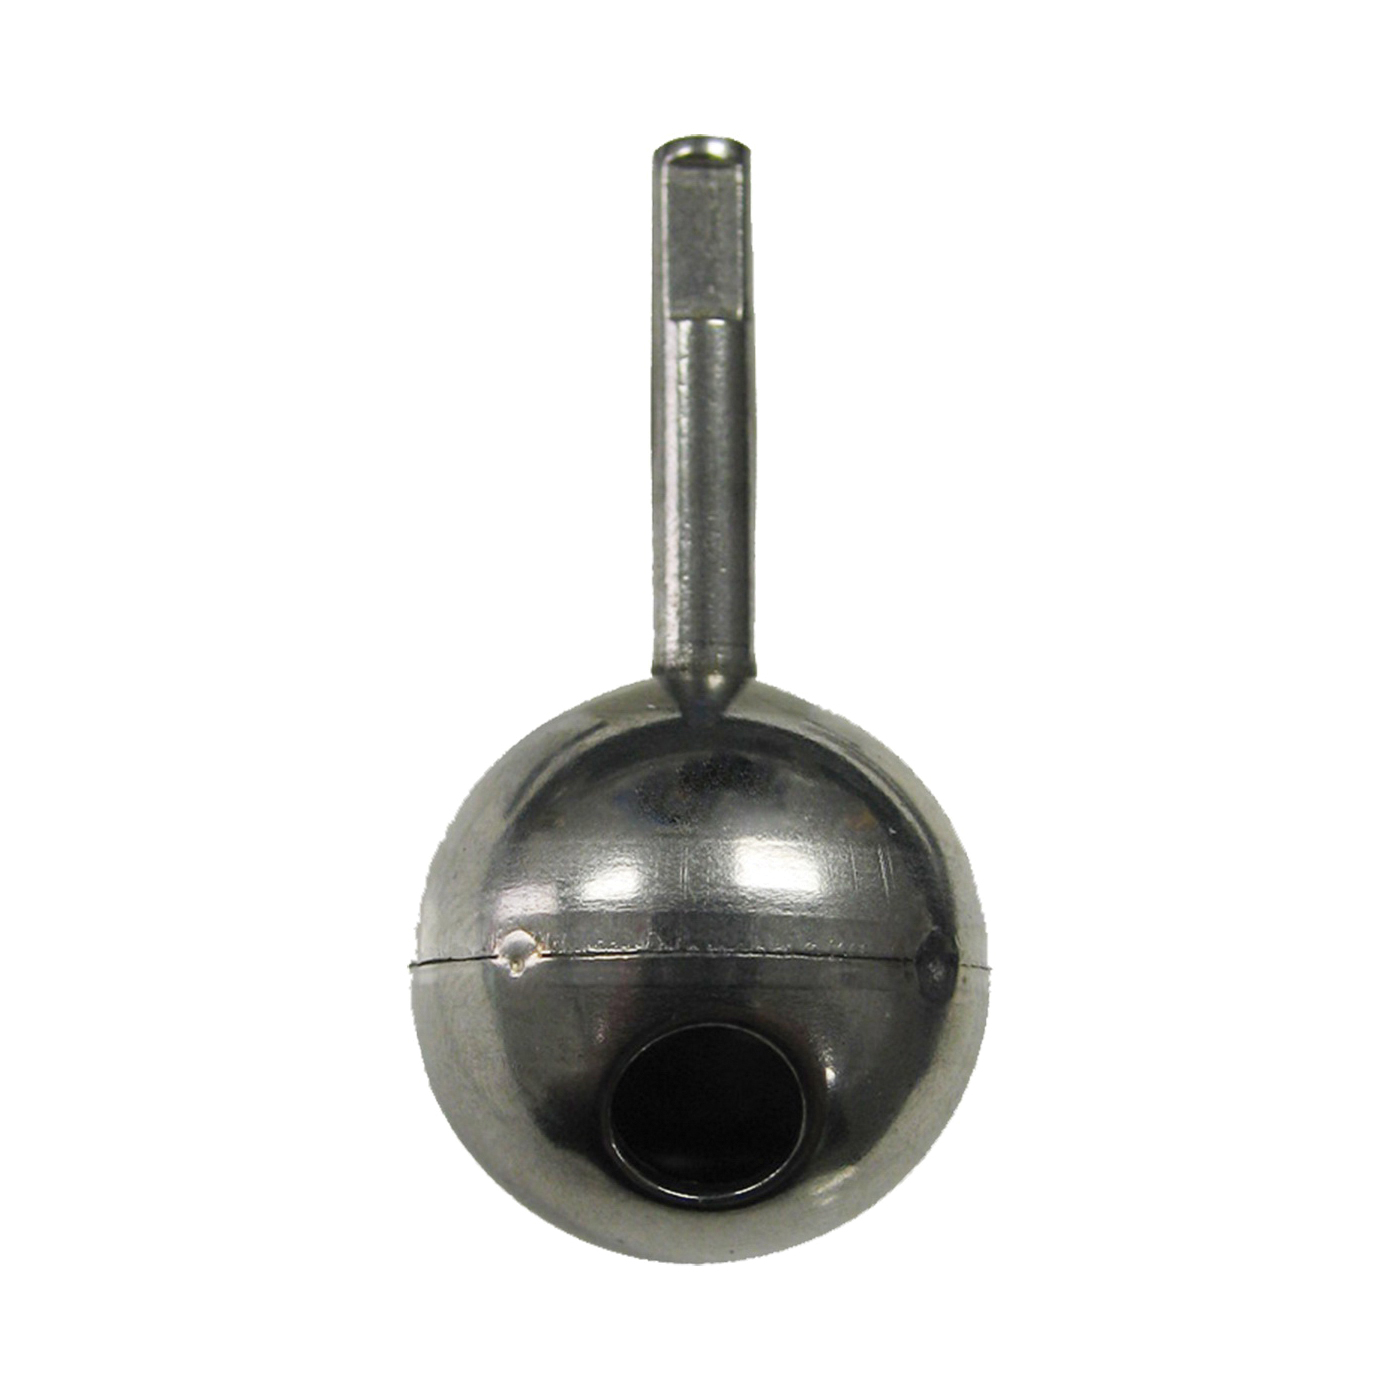 Kissler PB70S Faucet Ball, For Use With Delta®-Delex Single Lever Faucet Stems, Stainless Steel